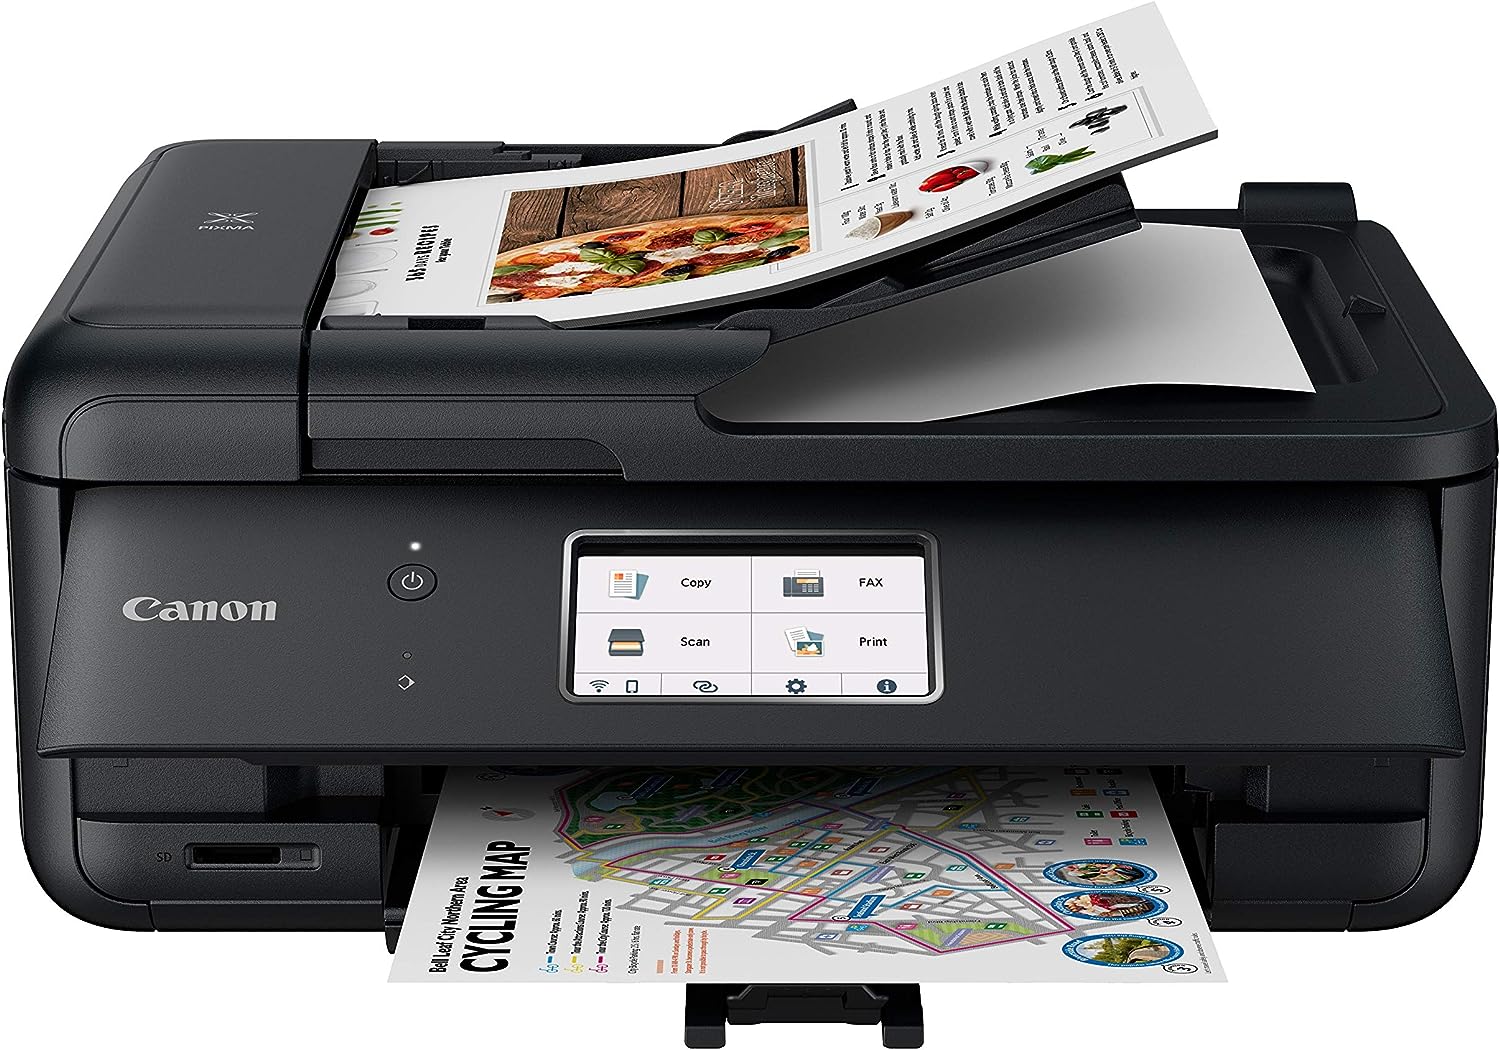 How To Download Canon Printer Software Without The CD